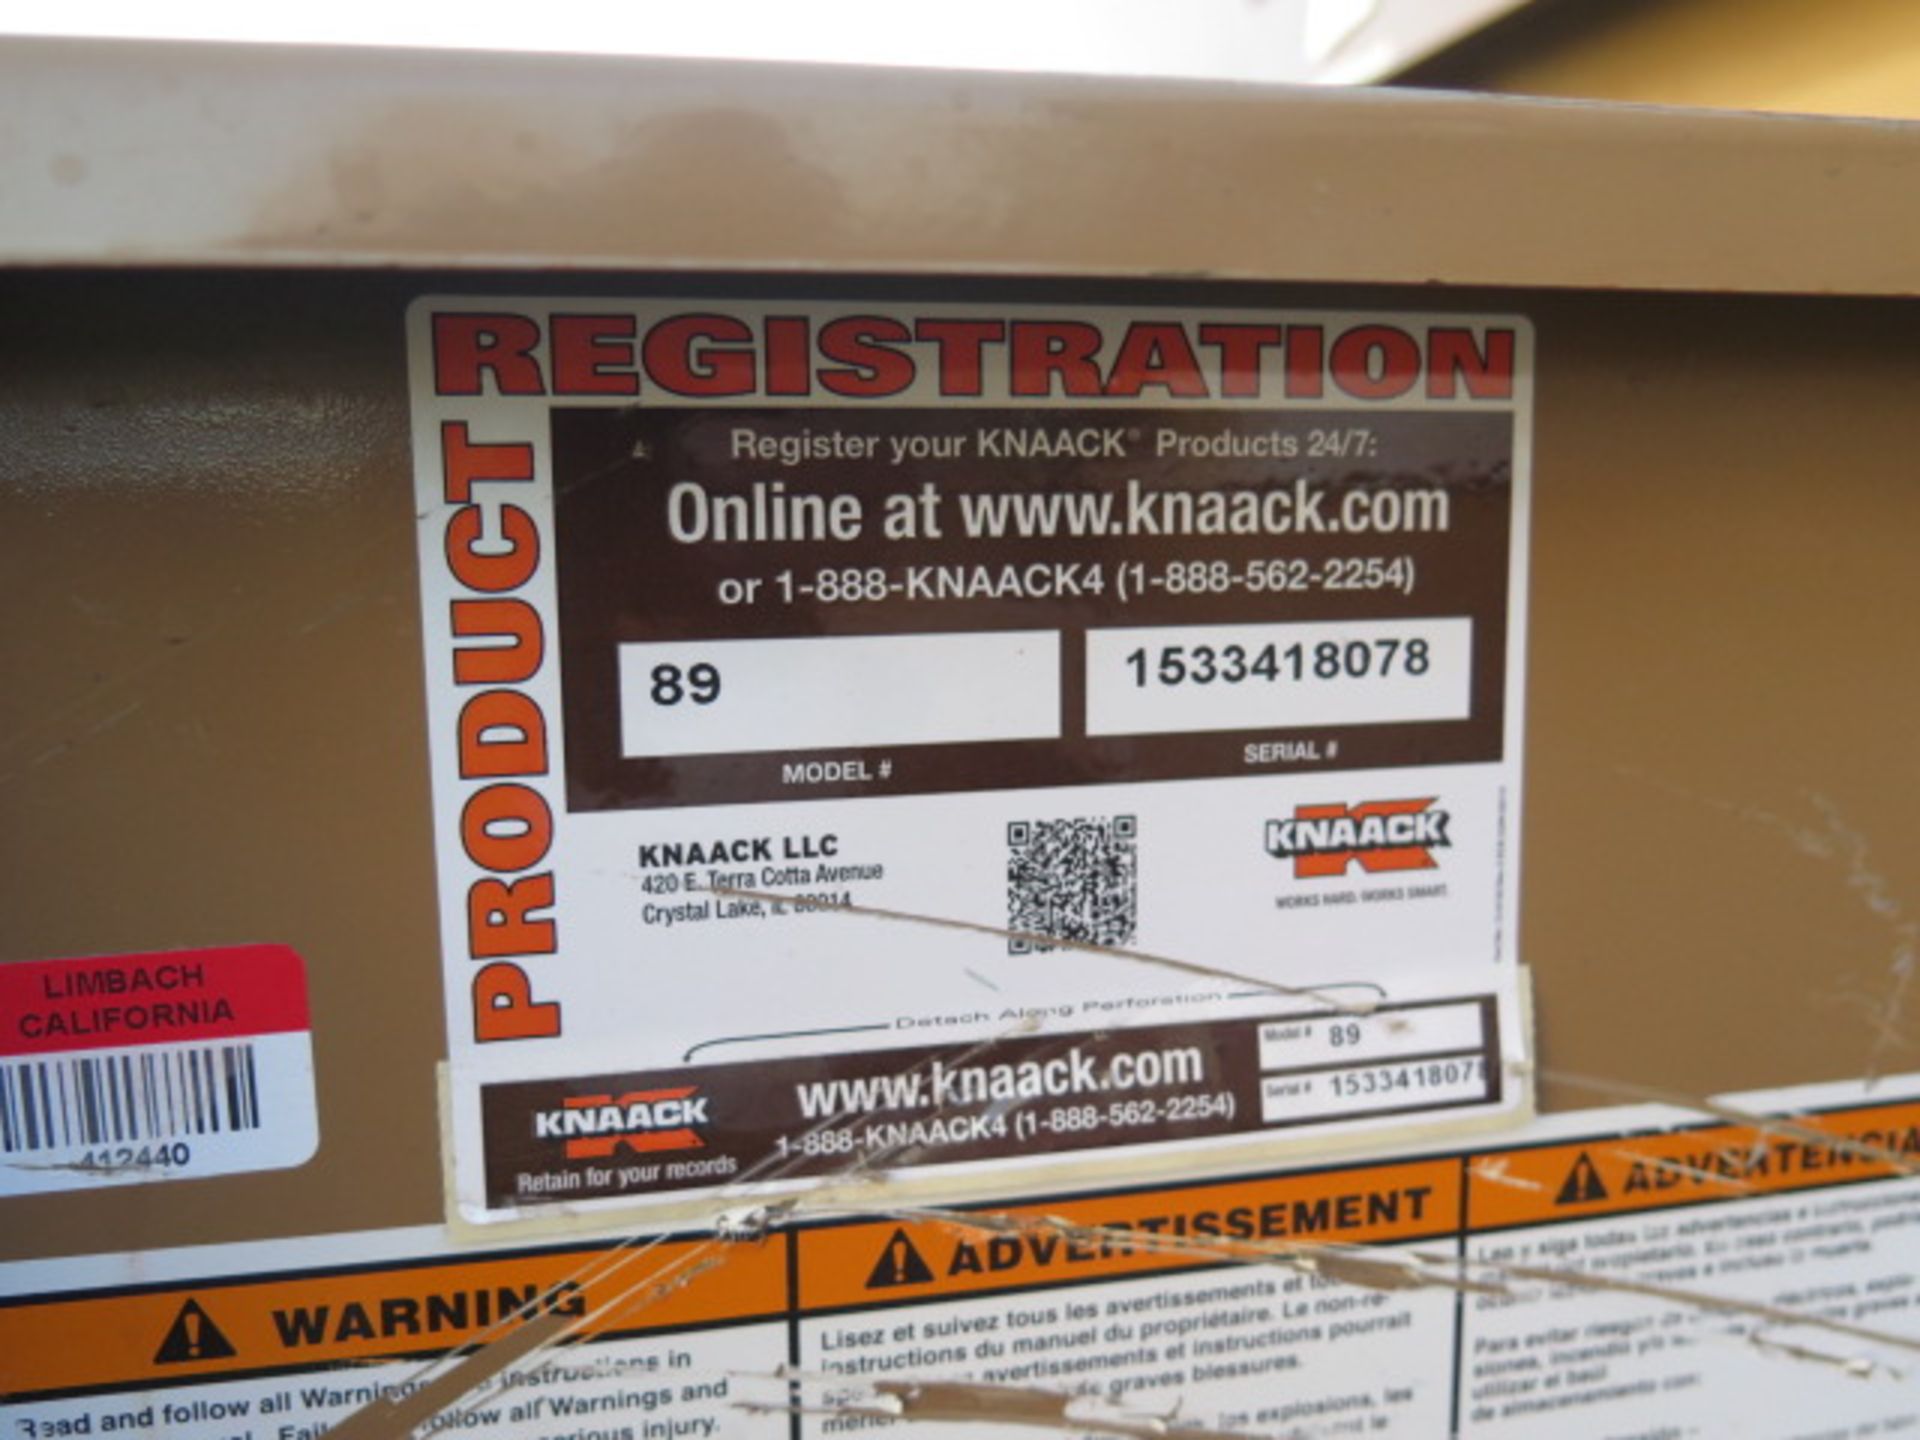 Knaack mdl. 89 "Storage Master" Rolling Job Box (SOLD AS-IS - NO WARRANTY) - Image 5 of 5